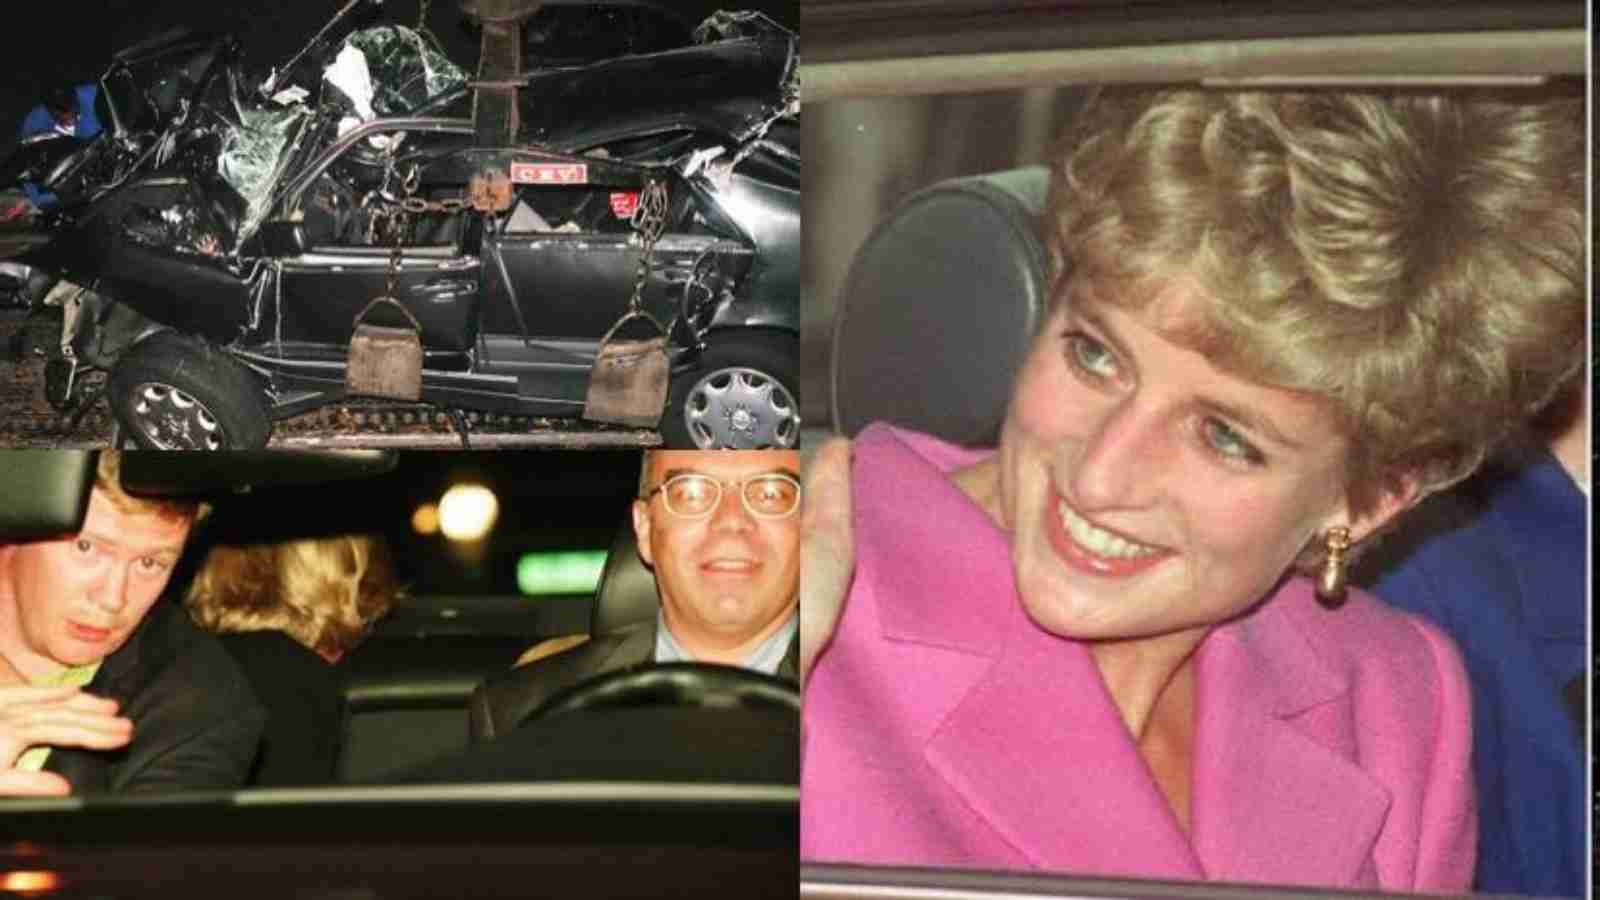 The Diana Investigations is streaming on Discovery+ revealing insights into her death